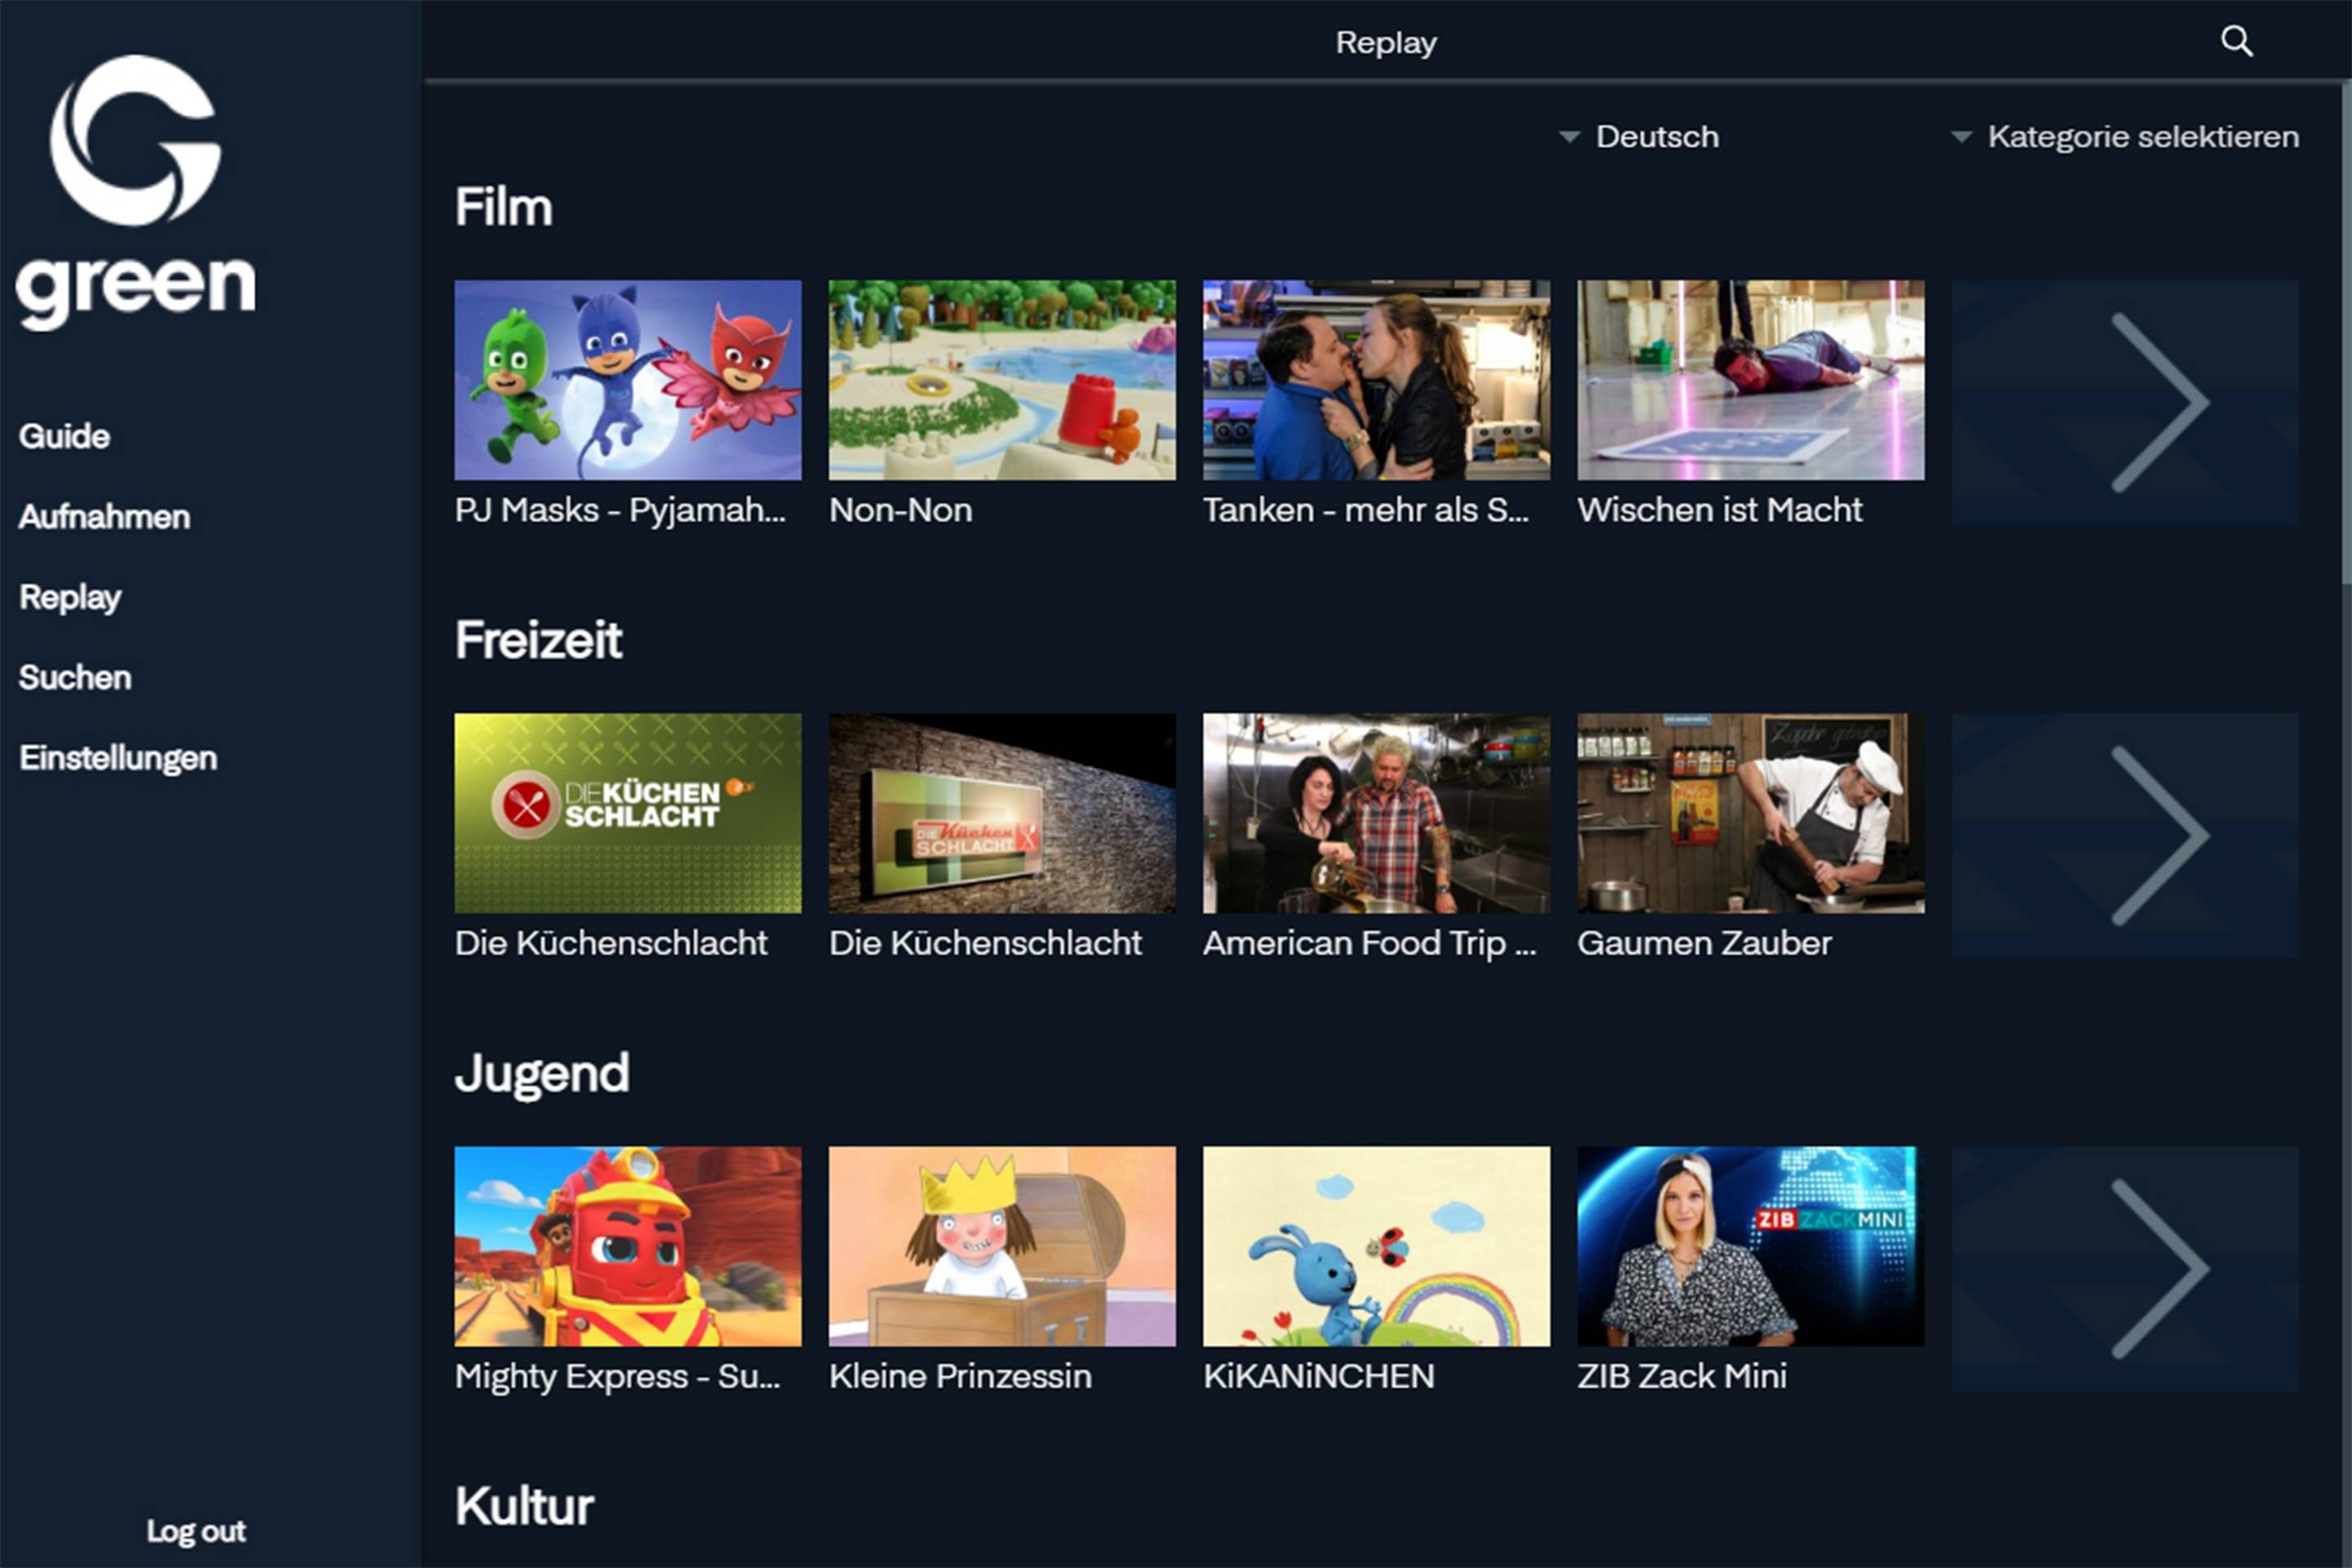 Screenshot of the replay function of the TV subscription